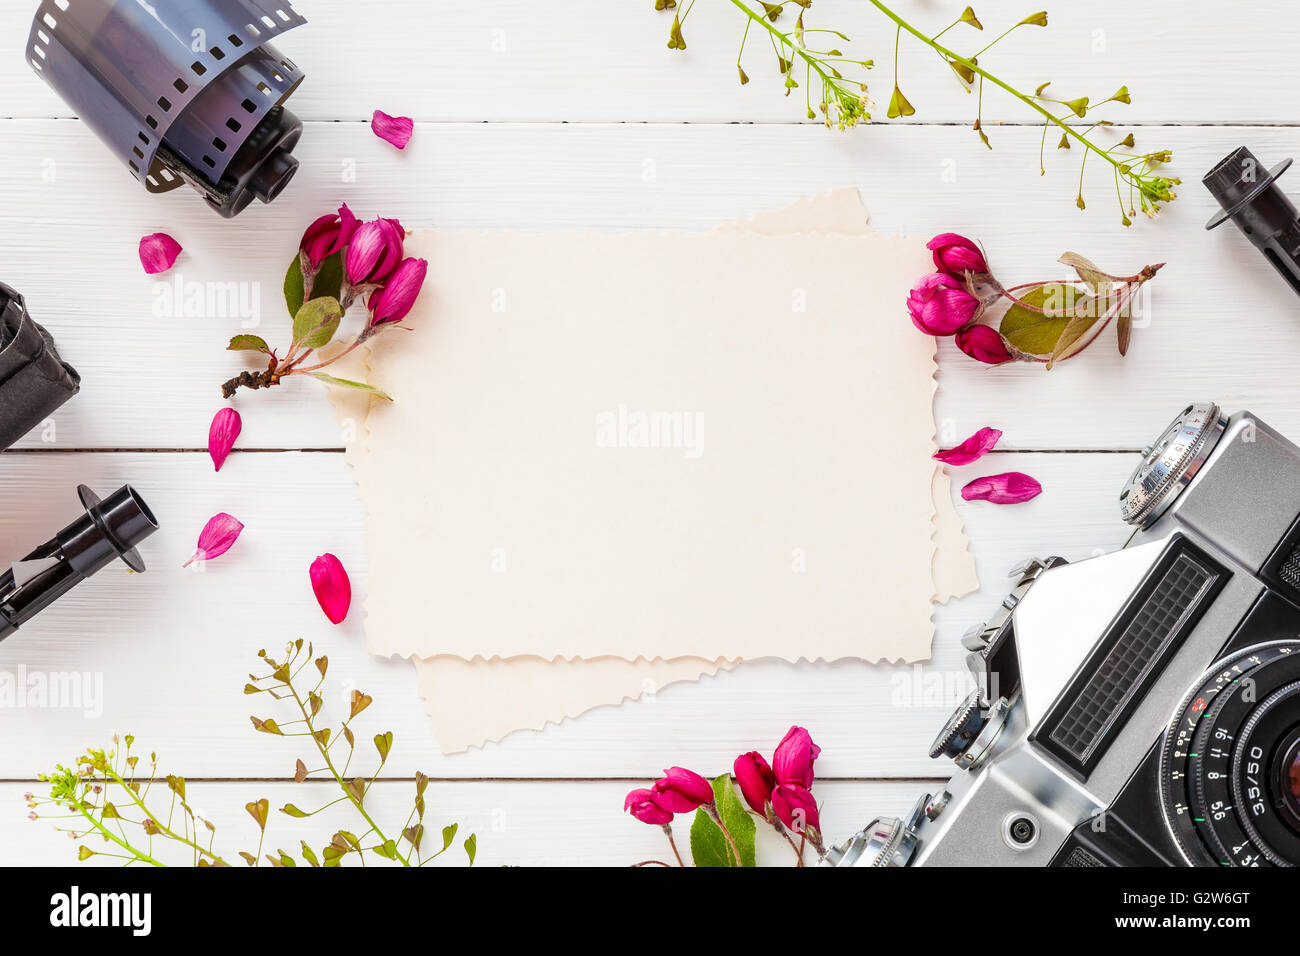 Empty photo frame for the inside, retro camera, photo film rolls and apple flowers on white background. Flat lay, top view. Stock Photo